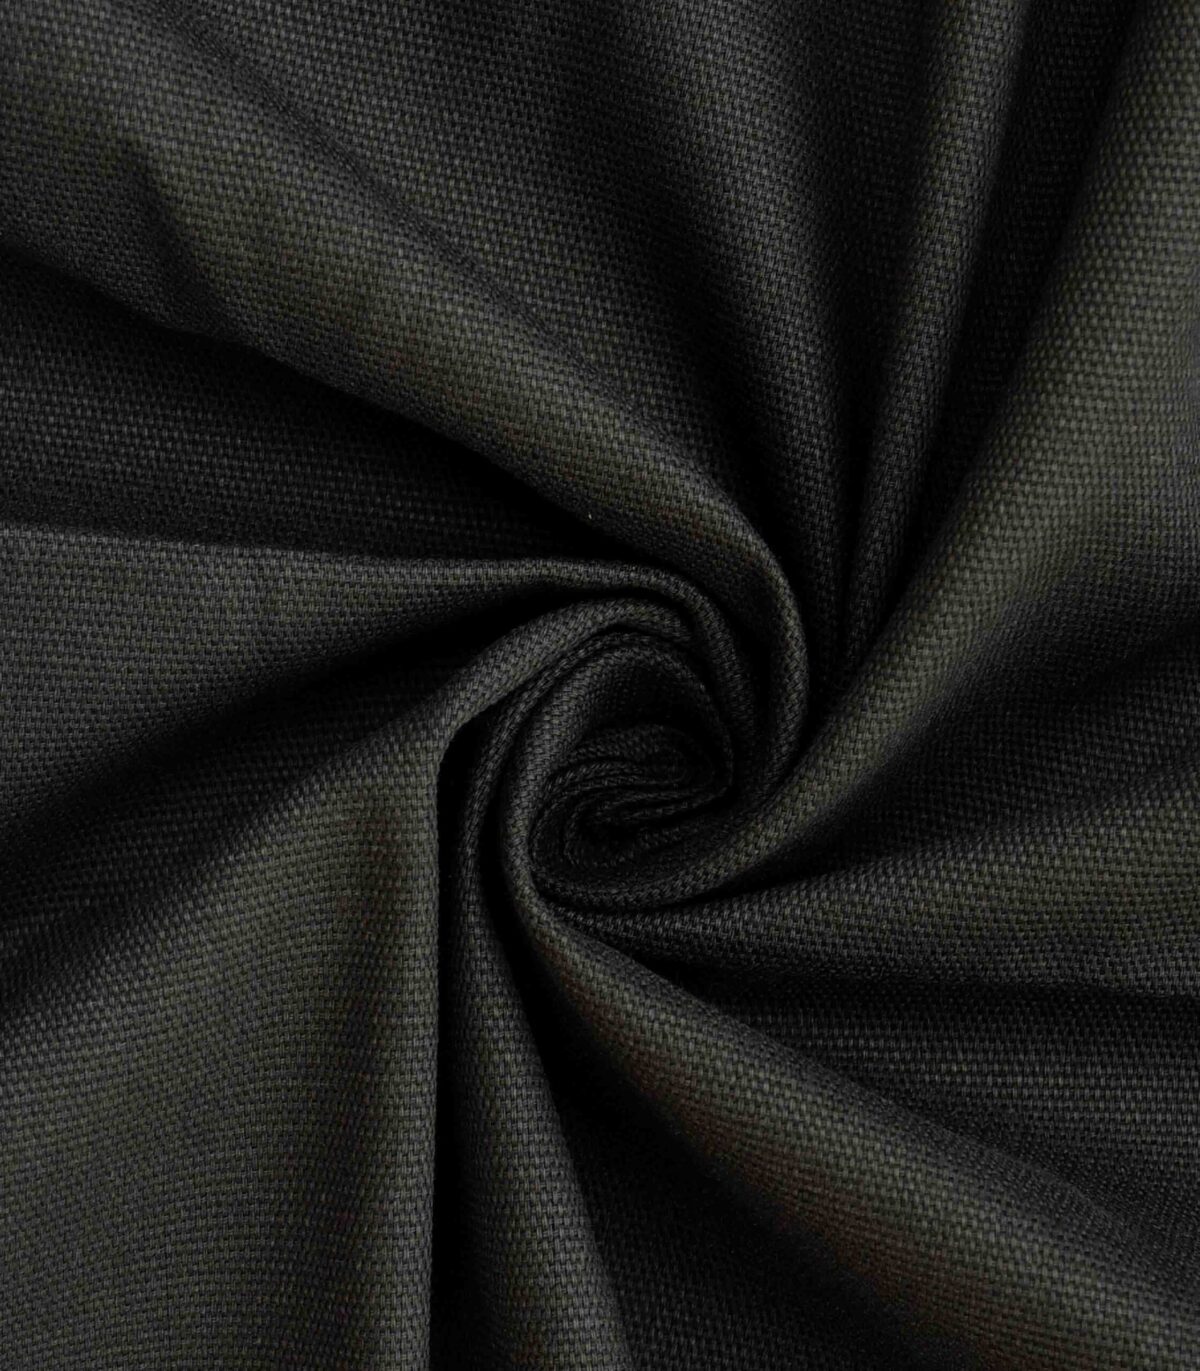 Cotton Black Color Dyed Woven Fabric